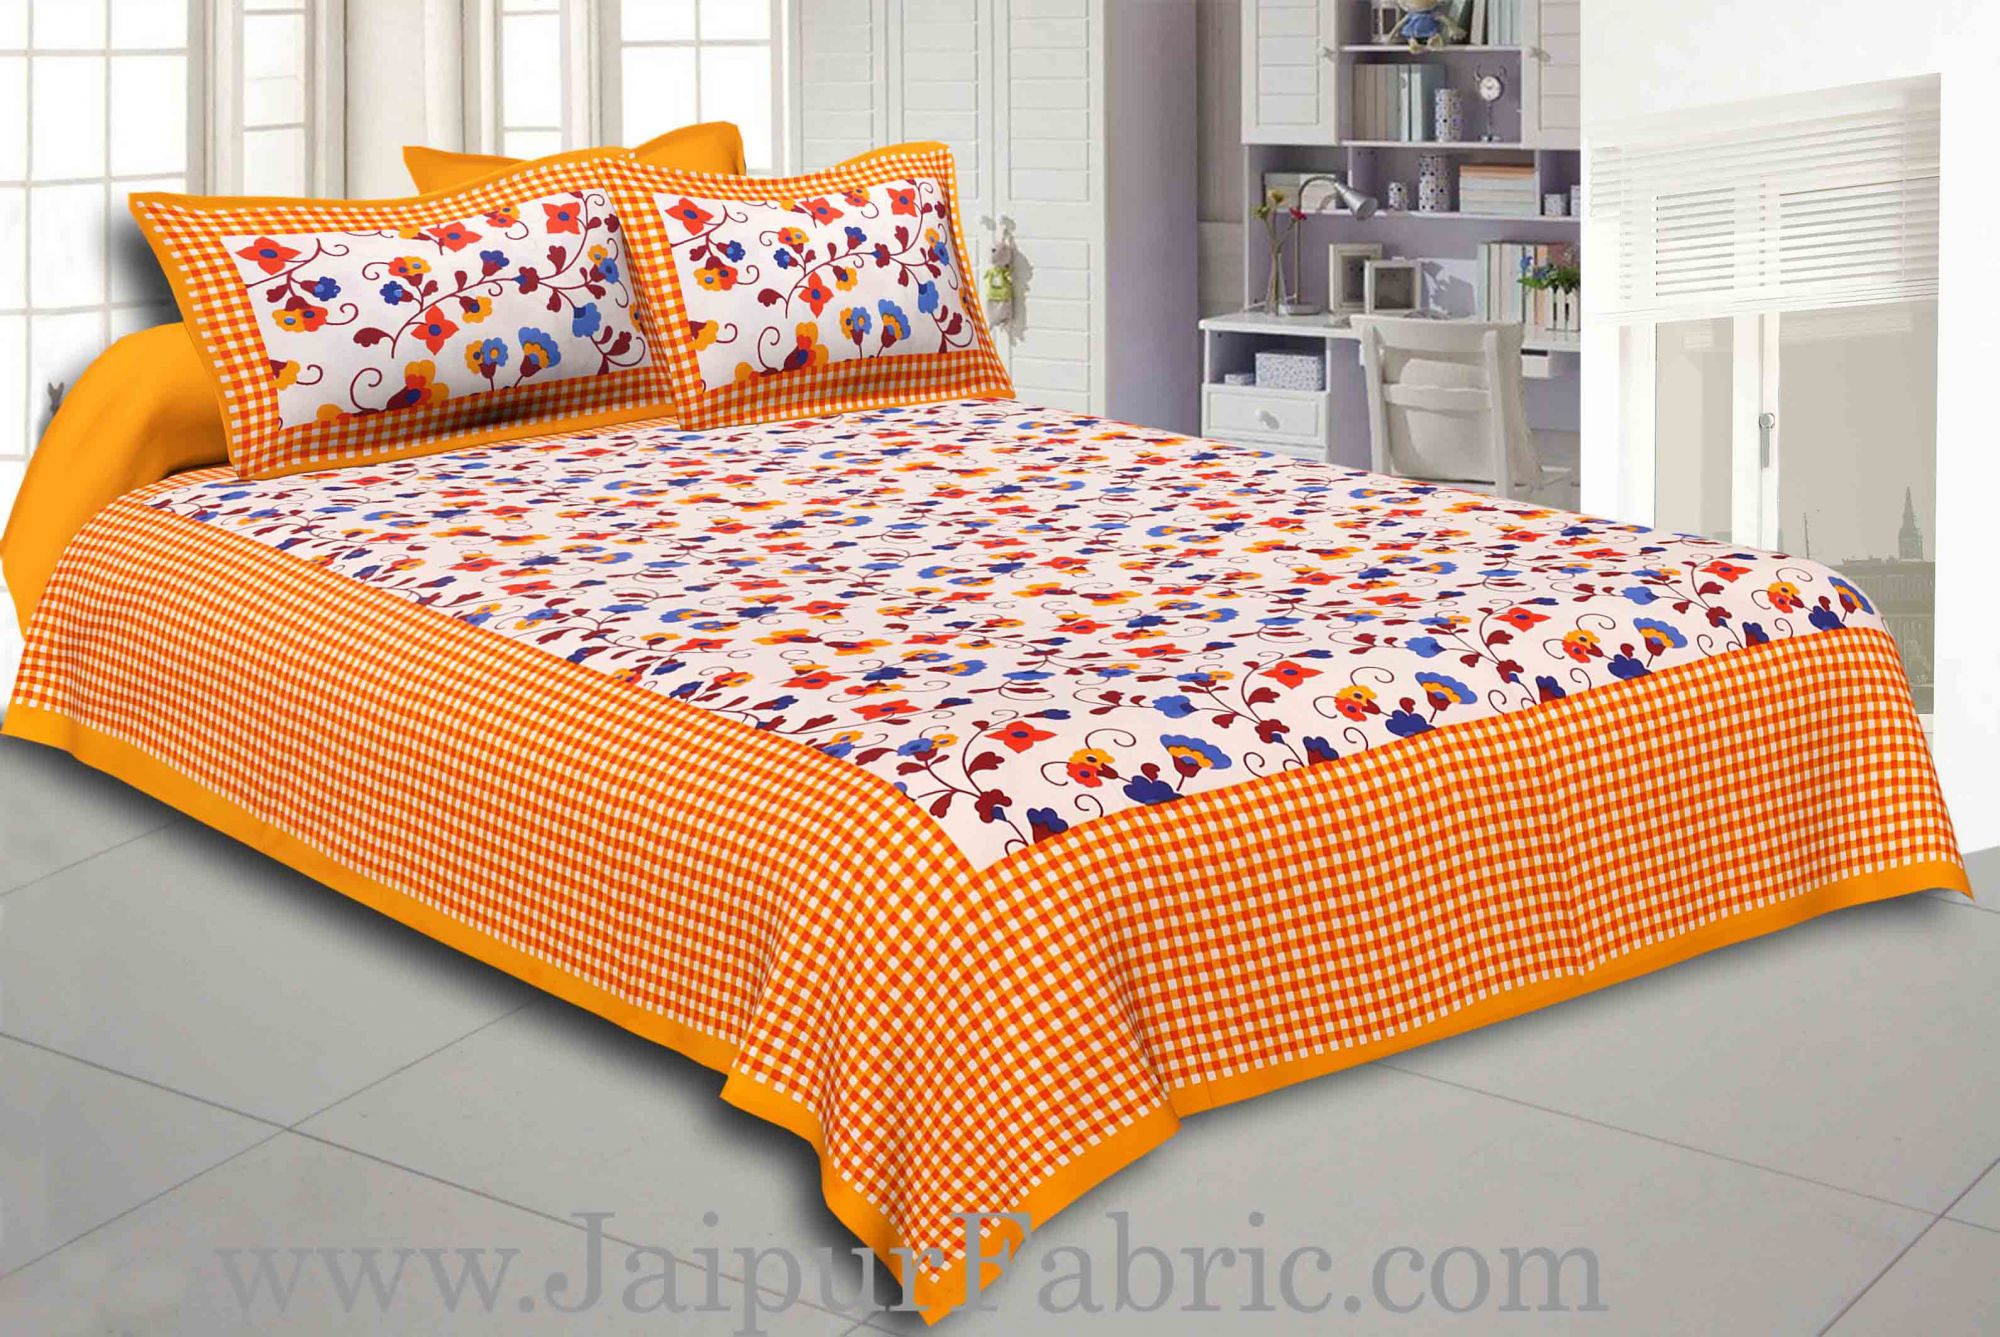 Yellow Border jaipuri design floral print Cotton Double Bedsheet with Pillow Cover